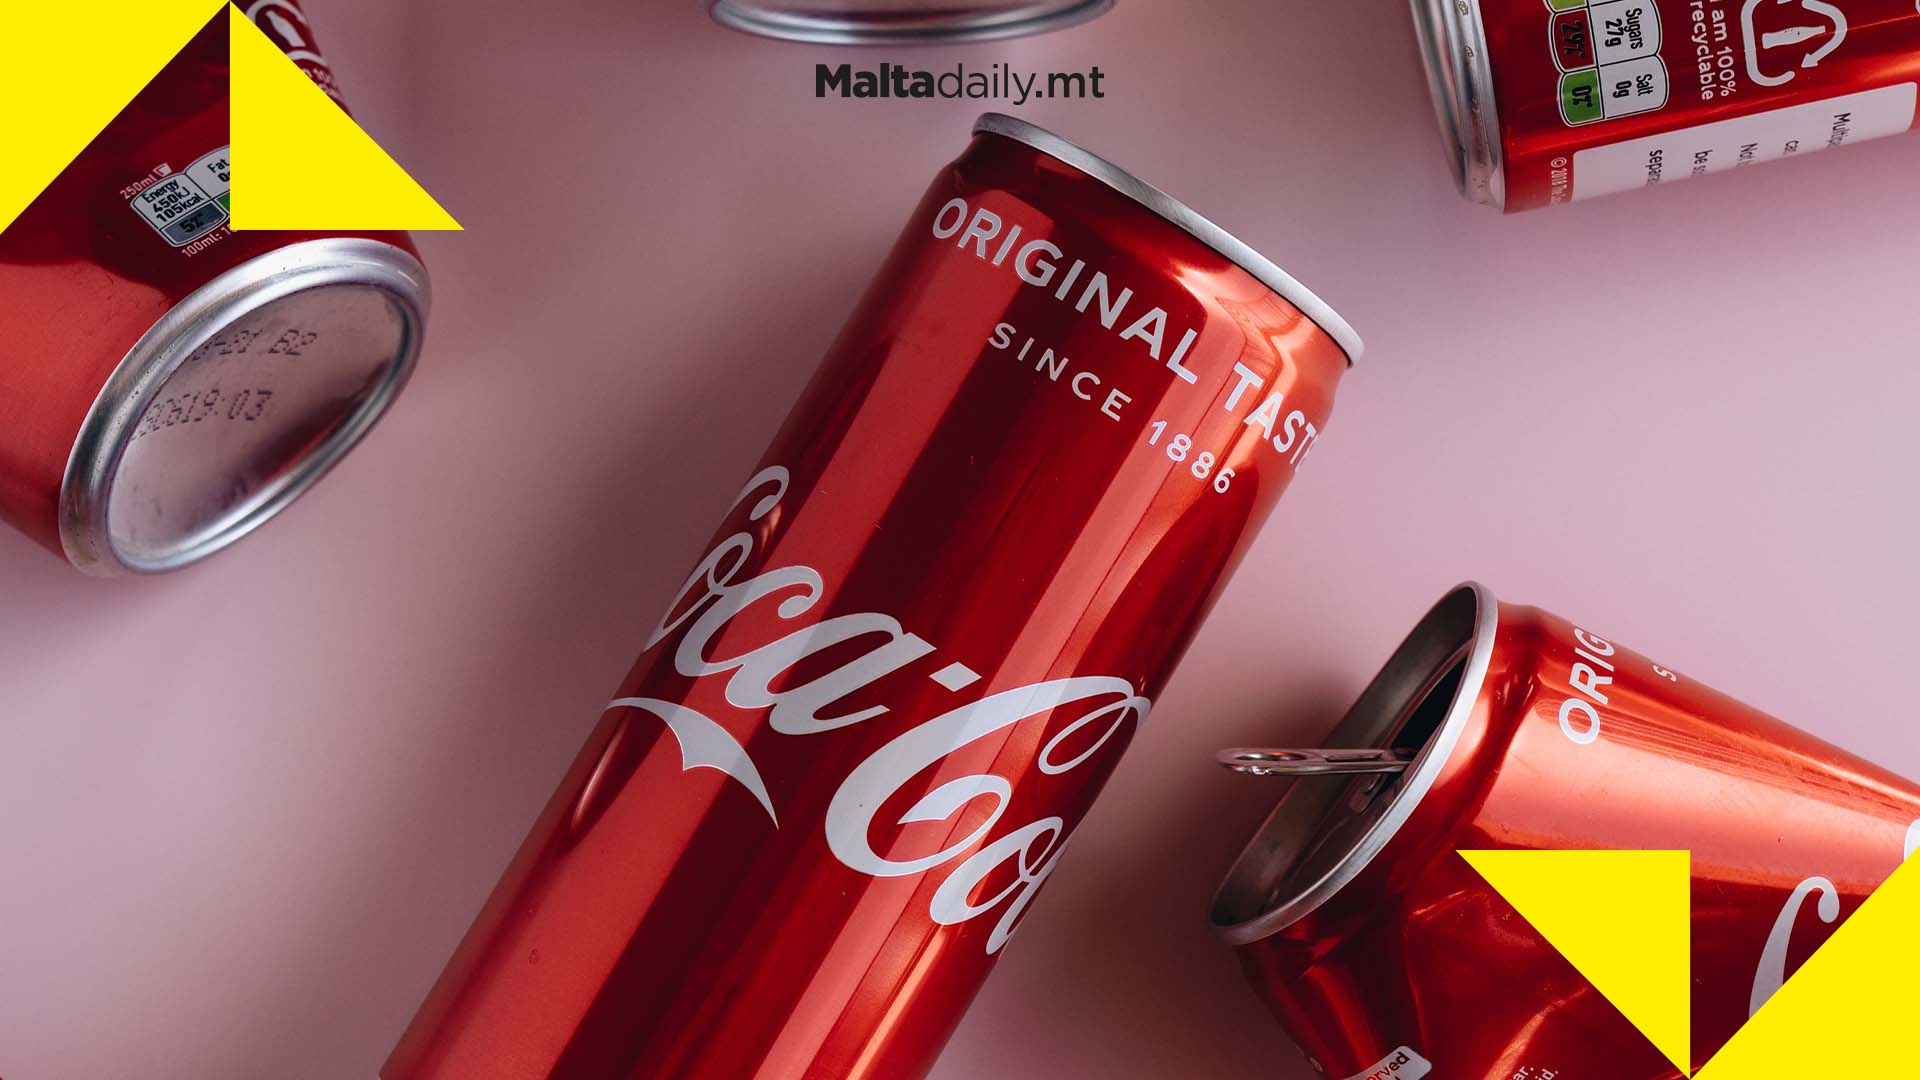 Malta's soft drink bottlers are the first in Europe to reduce content by 10%